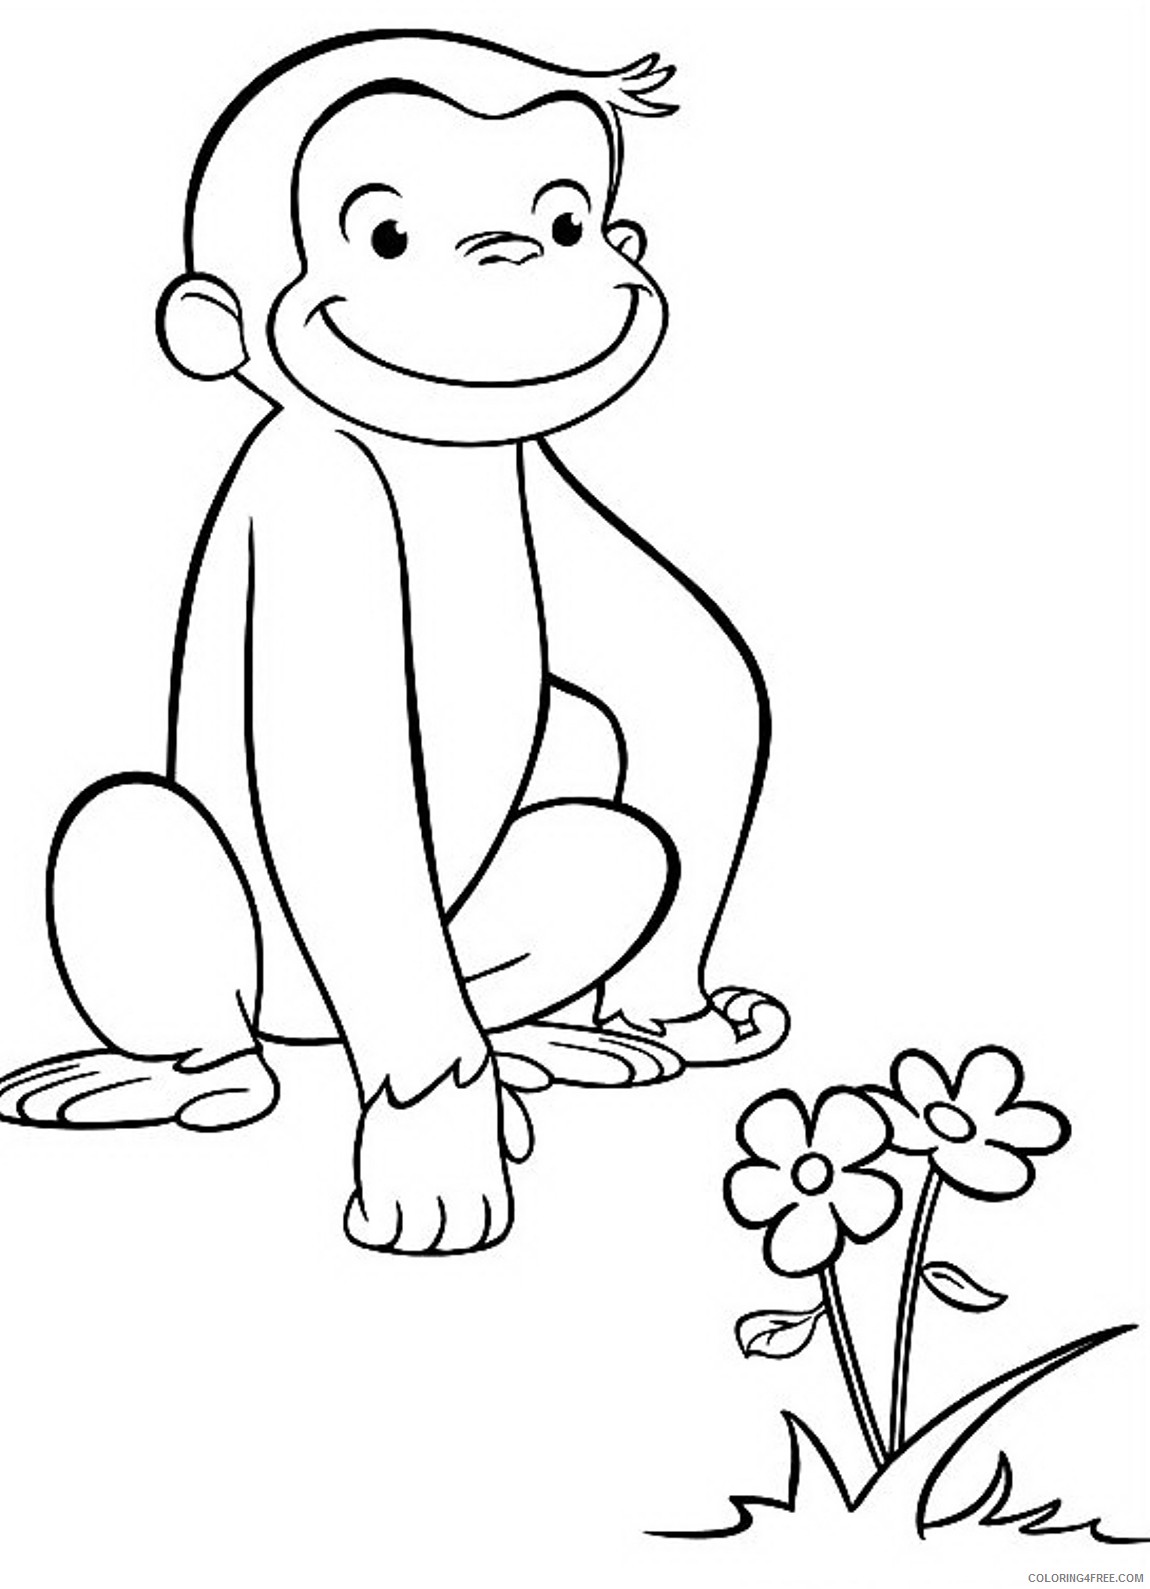 curious george coloring pages seeing flower Coloring4free